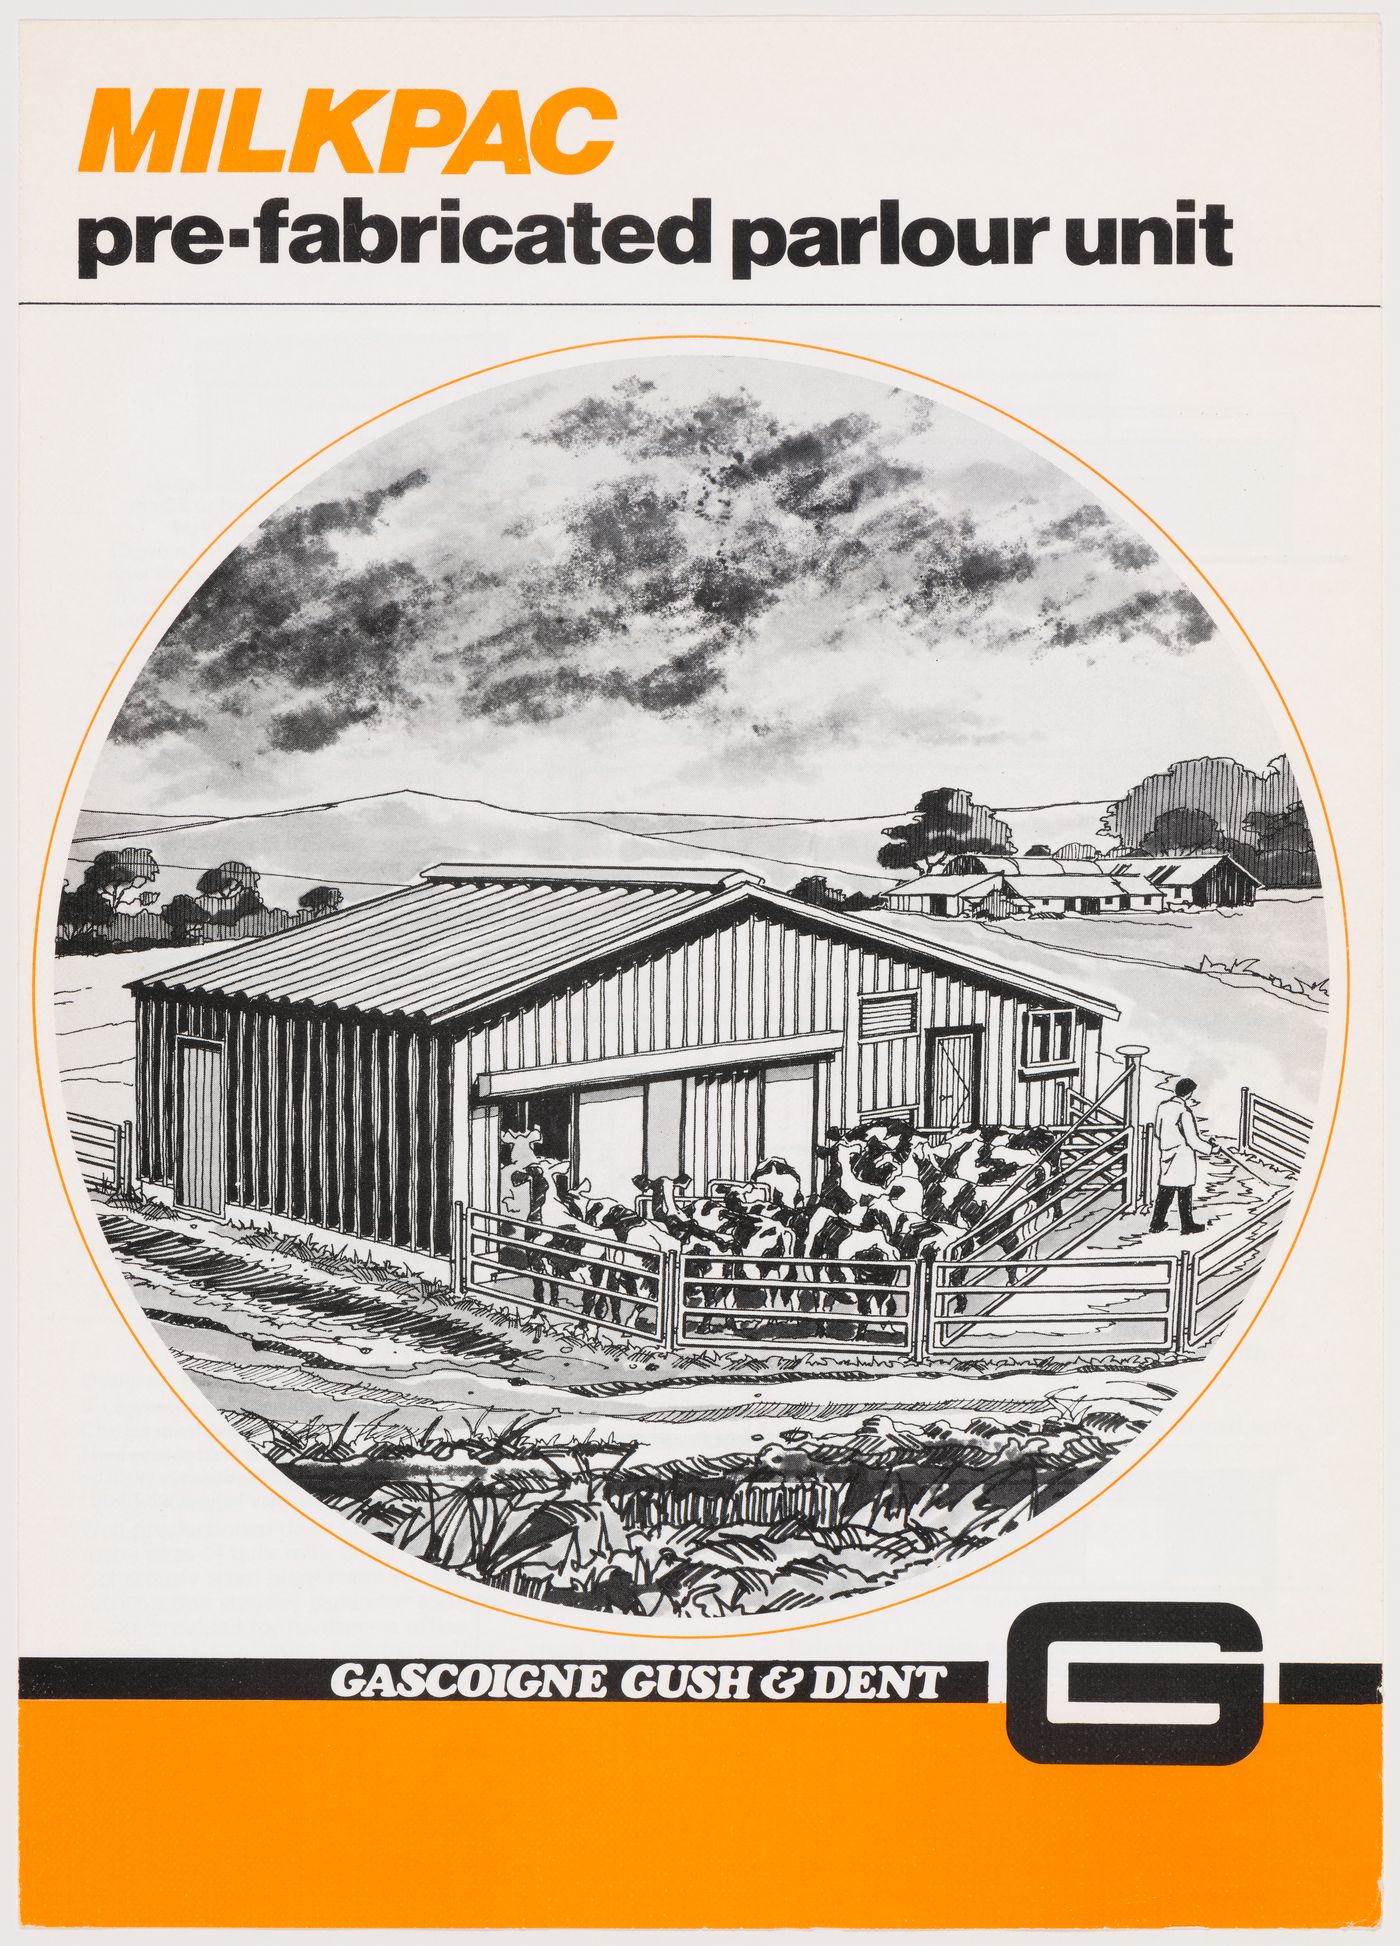 Leaflet about MILKPAC pre-fabricated parlour unit, from the project file "Westpen"